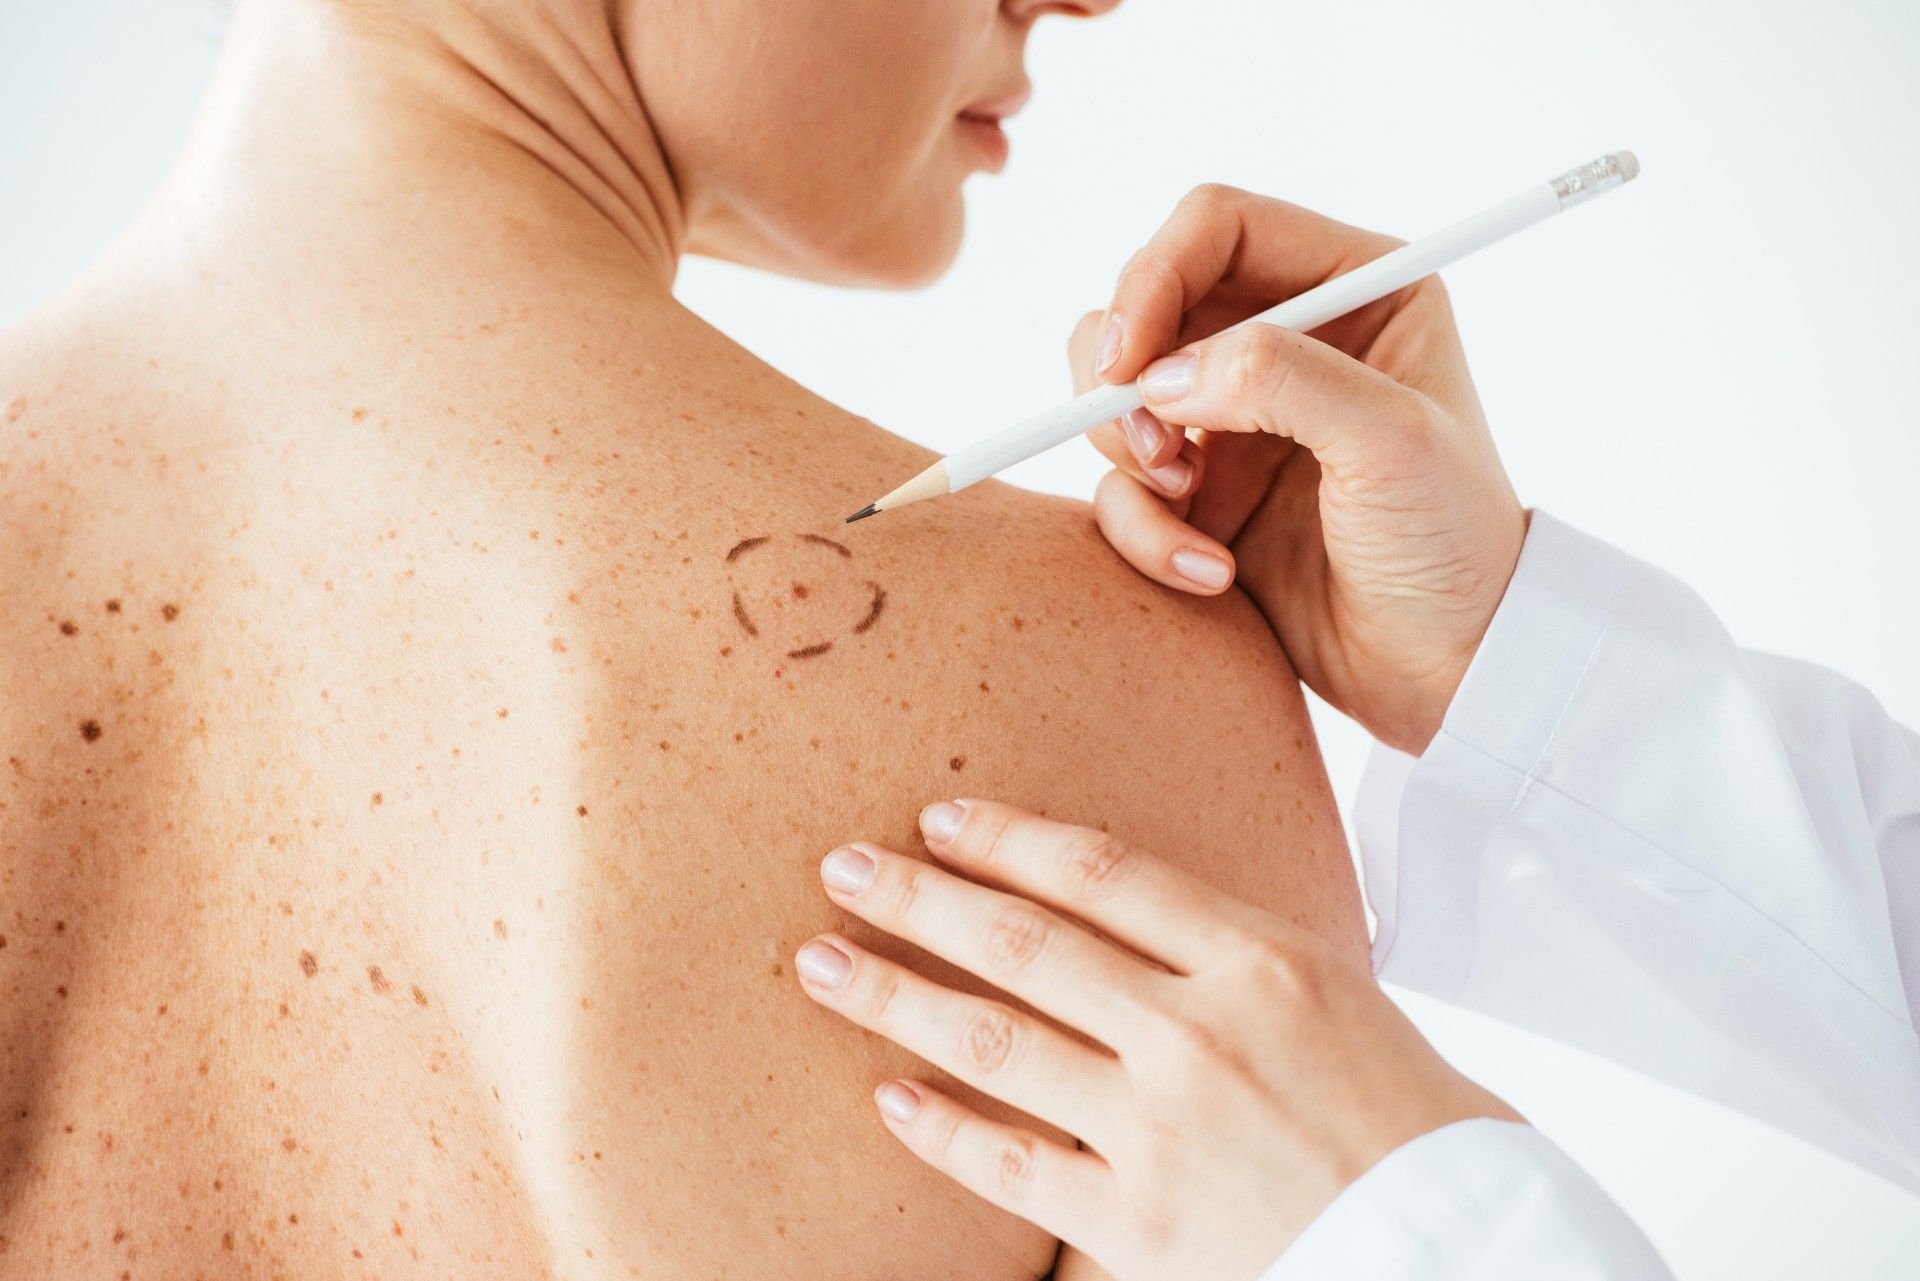 dermatologist marking mole for removal on patient's back